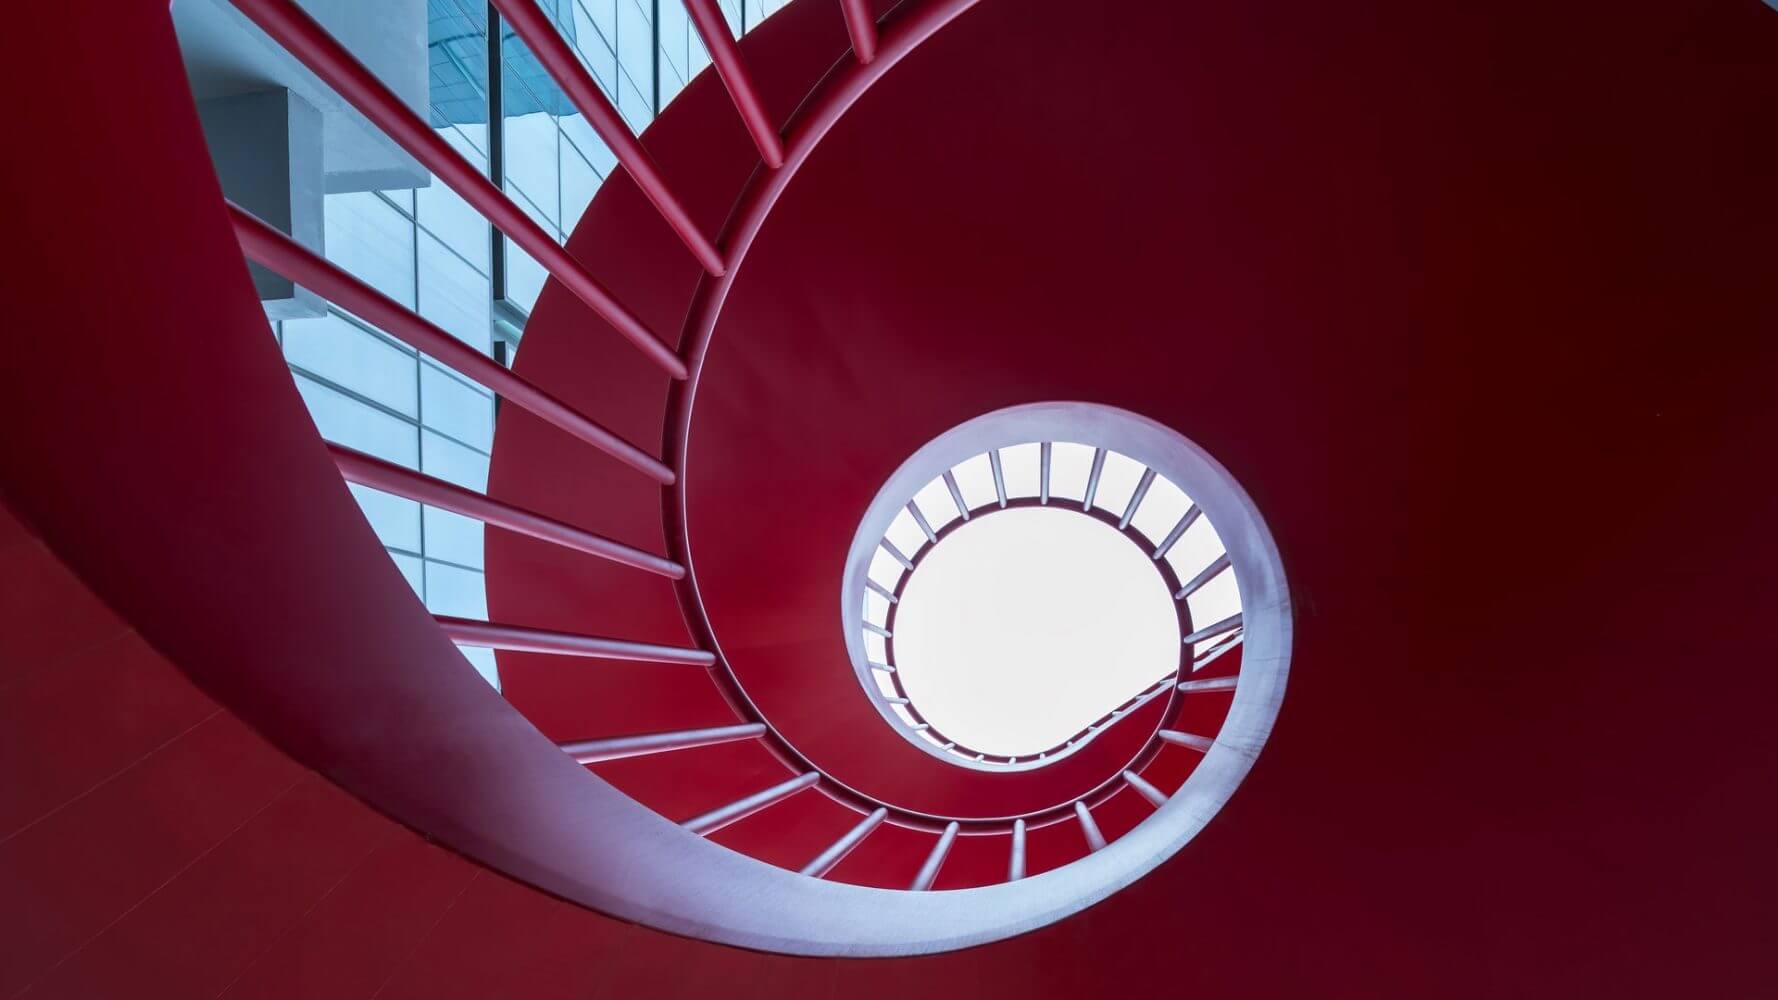 Rising rates and the role of high-quality fixed income, spiral stairs from the bottom-up